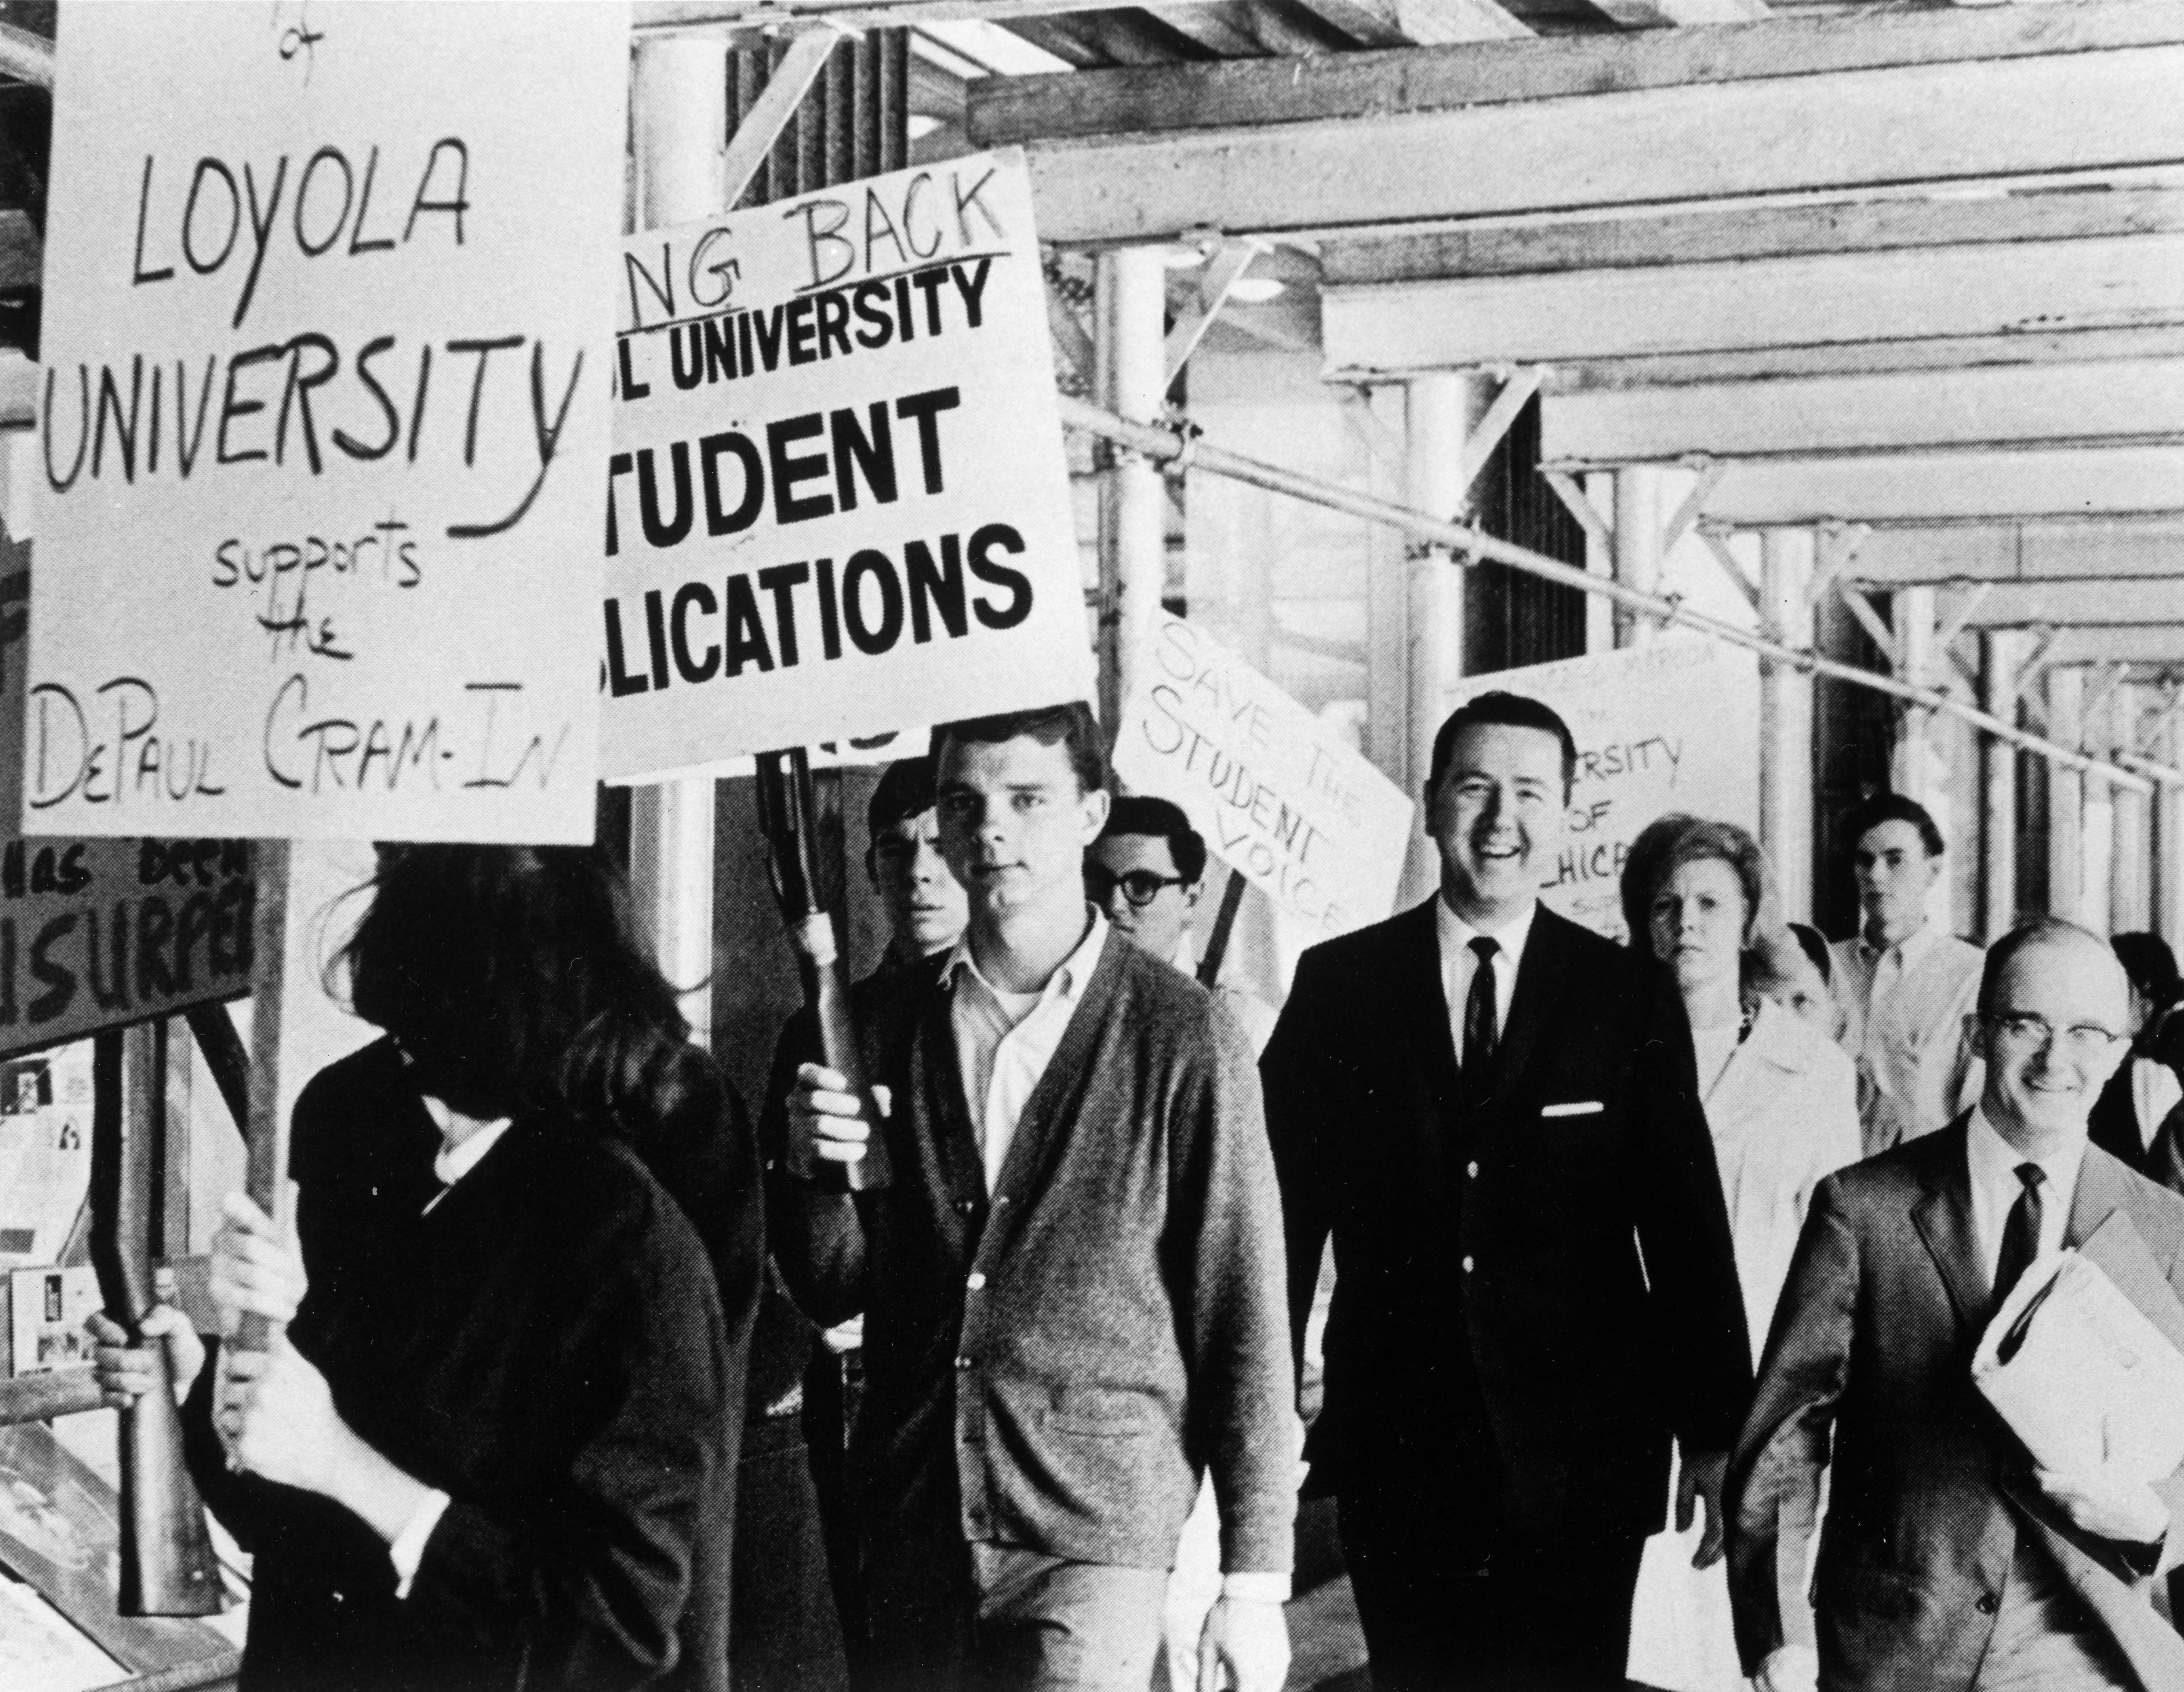 Chicago students protest in solidarity with the DePaul Cram-in (image courtesy of the DePaul Richardson Library Digital Collection)